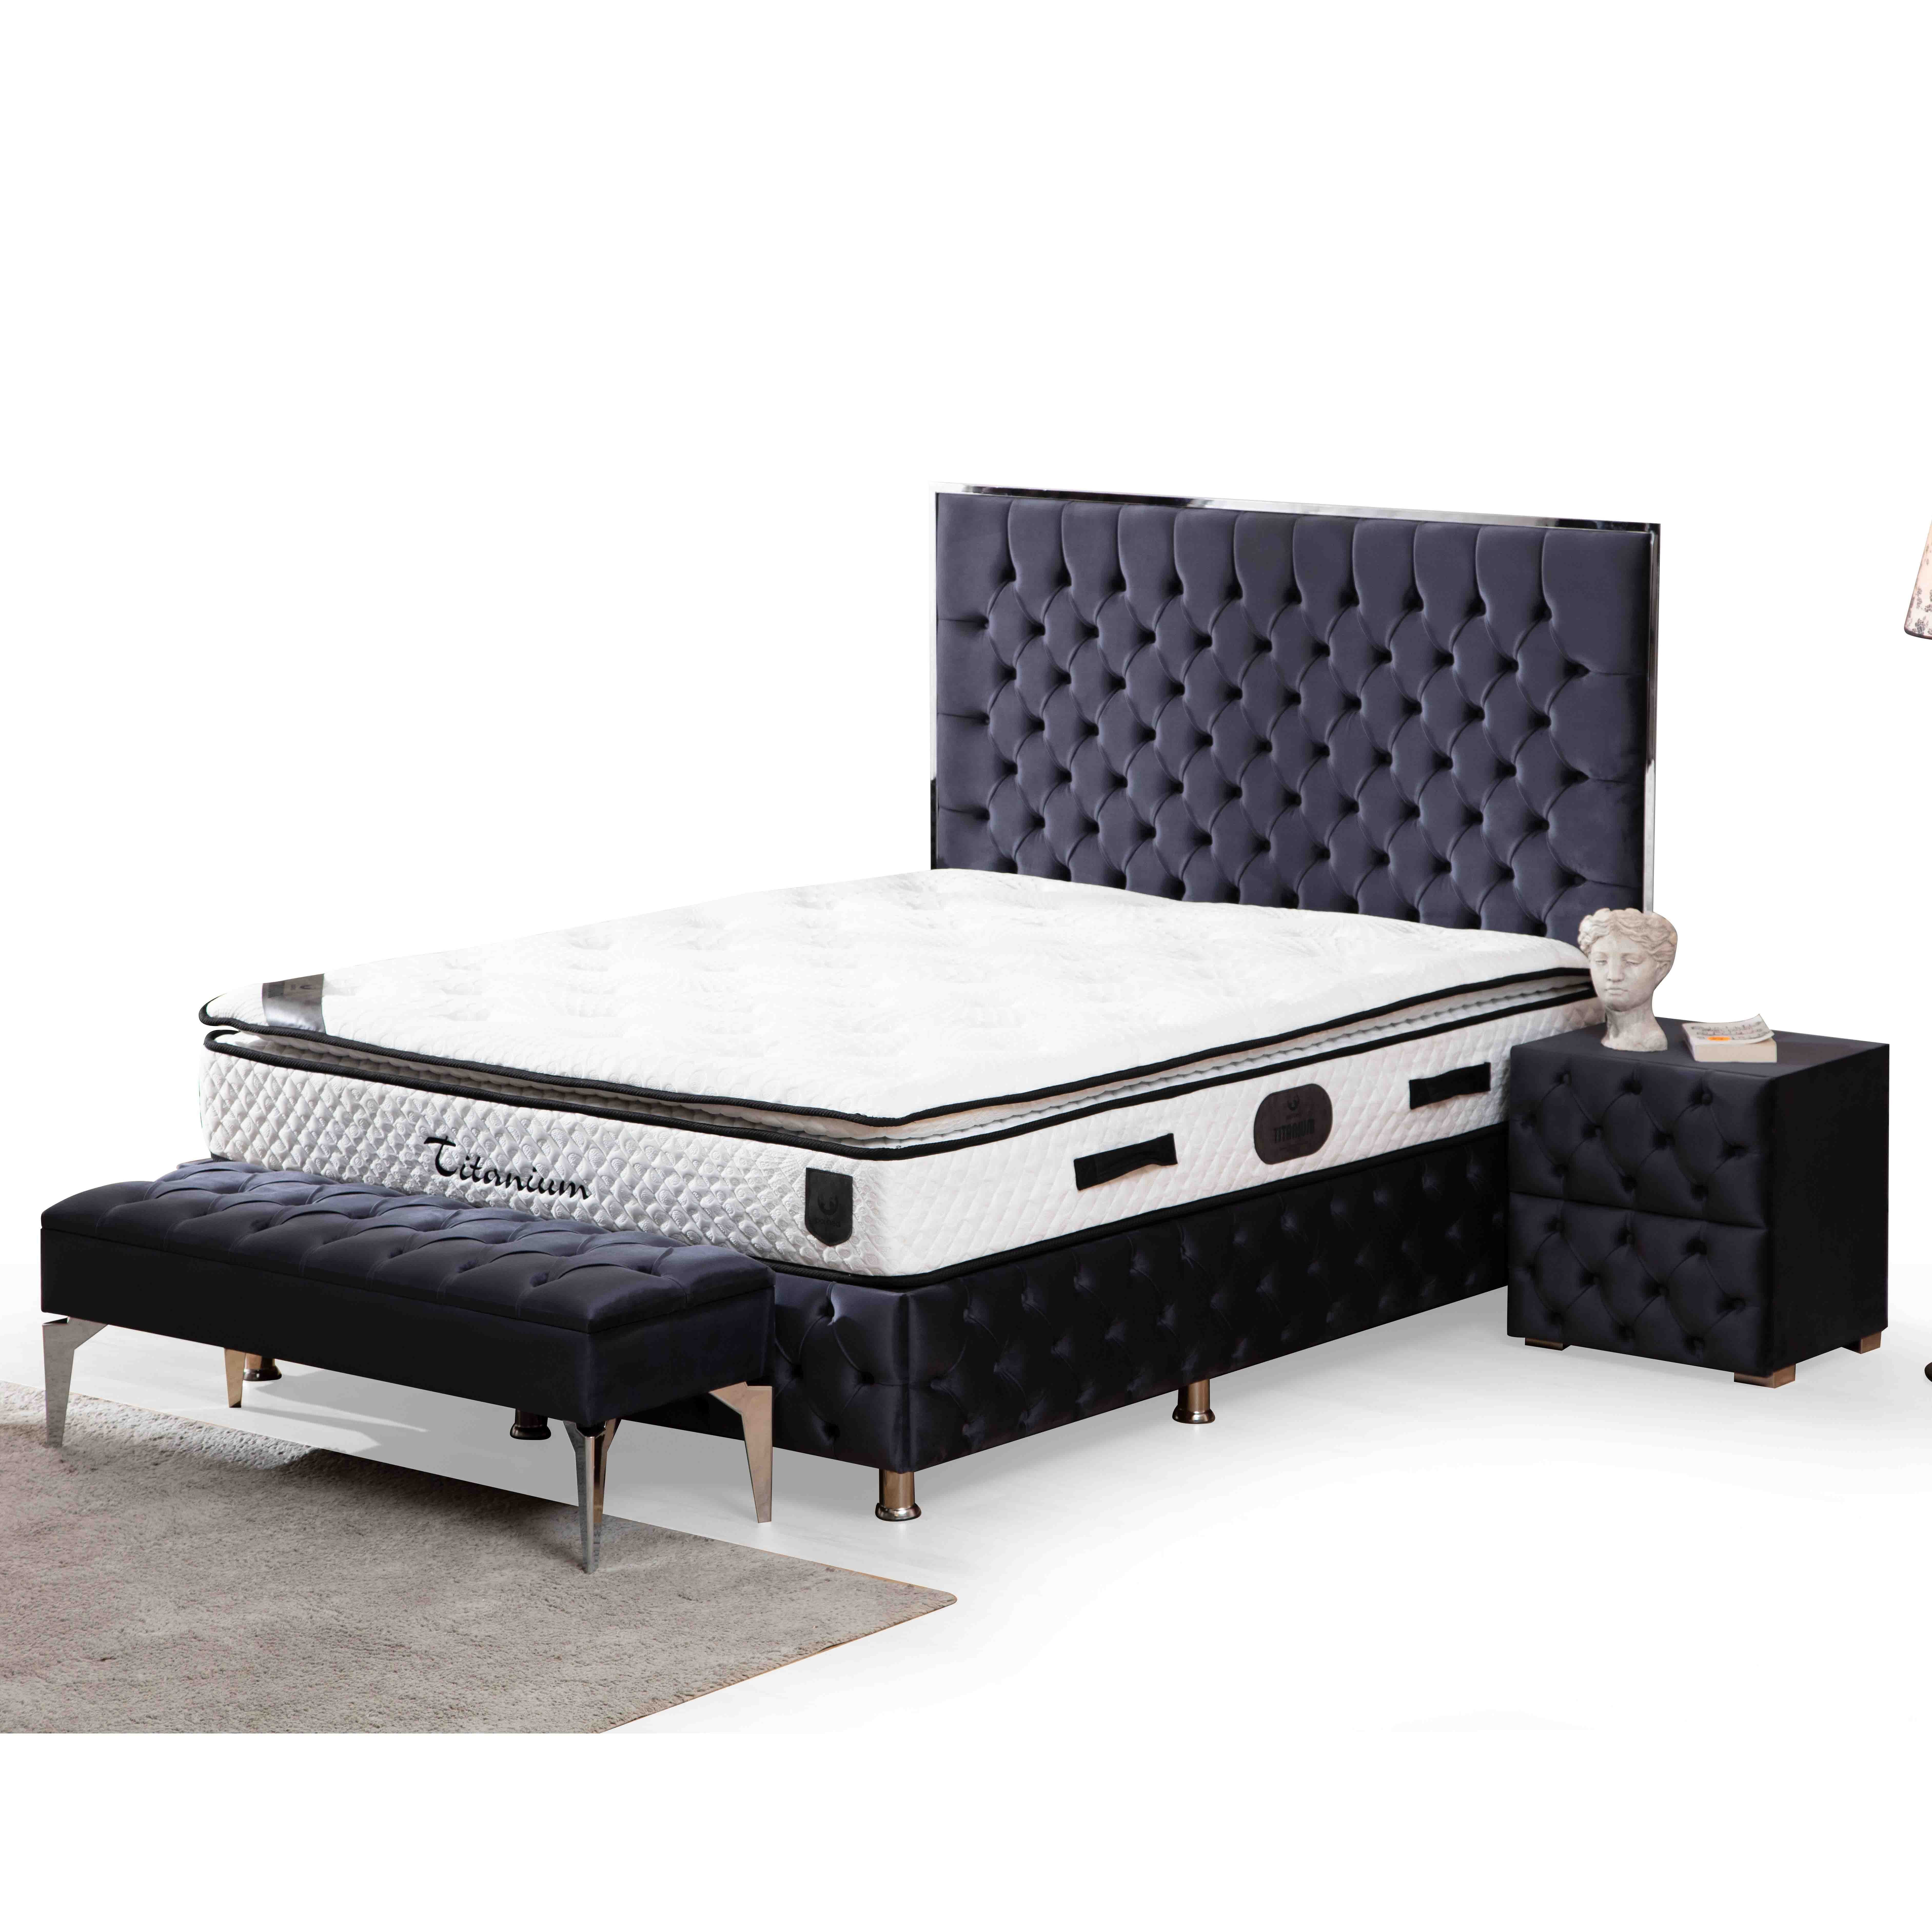 Metalax Bed With Storage 140*190